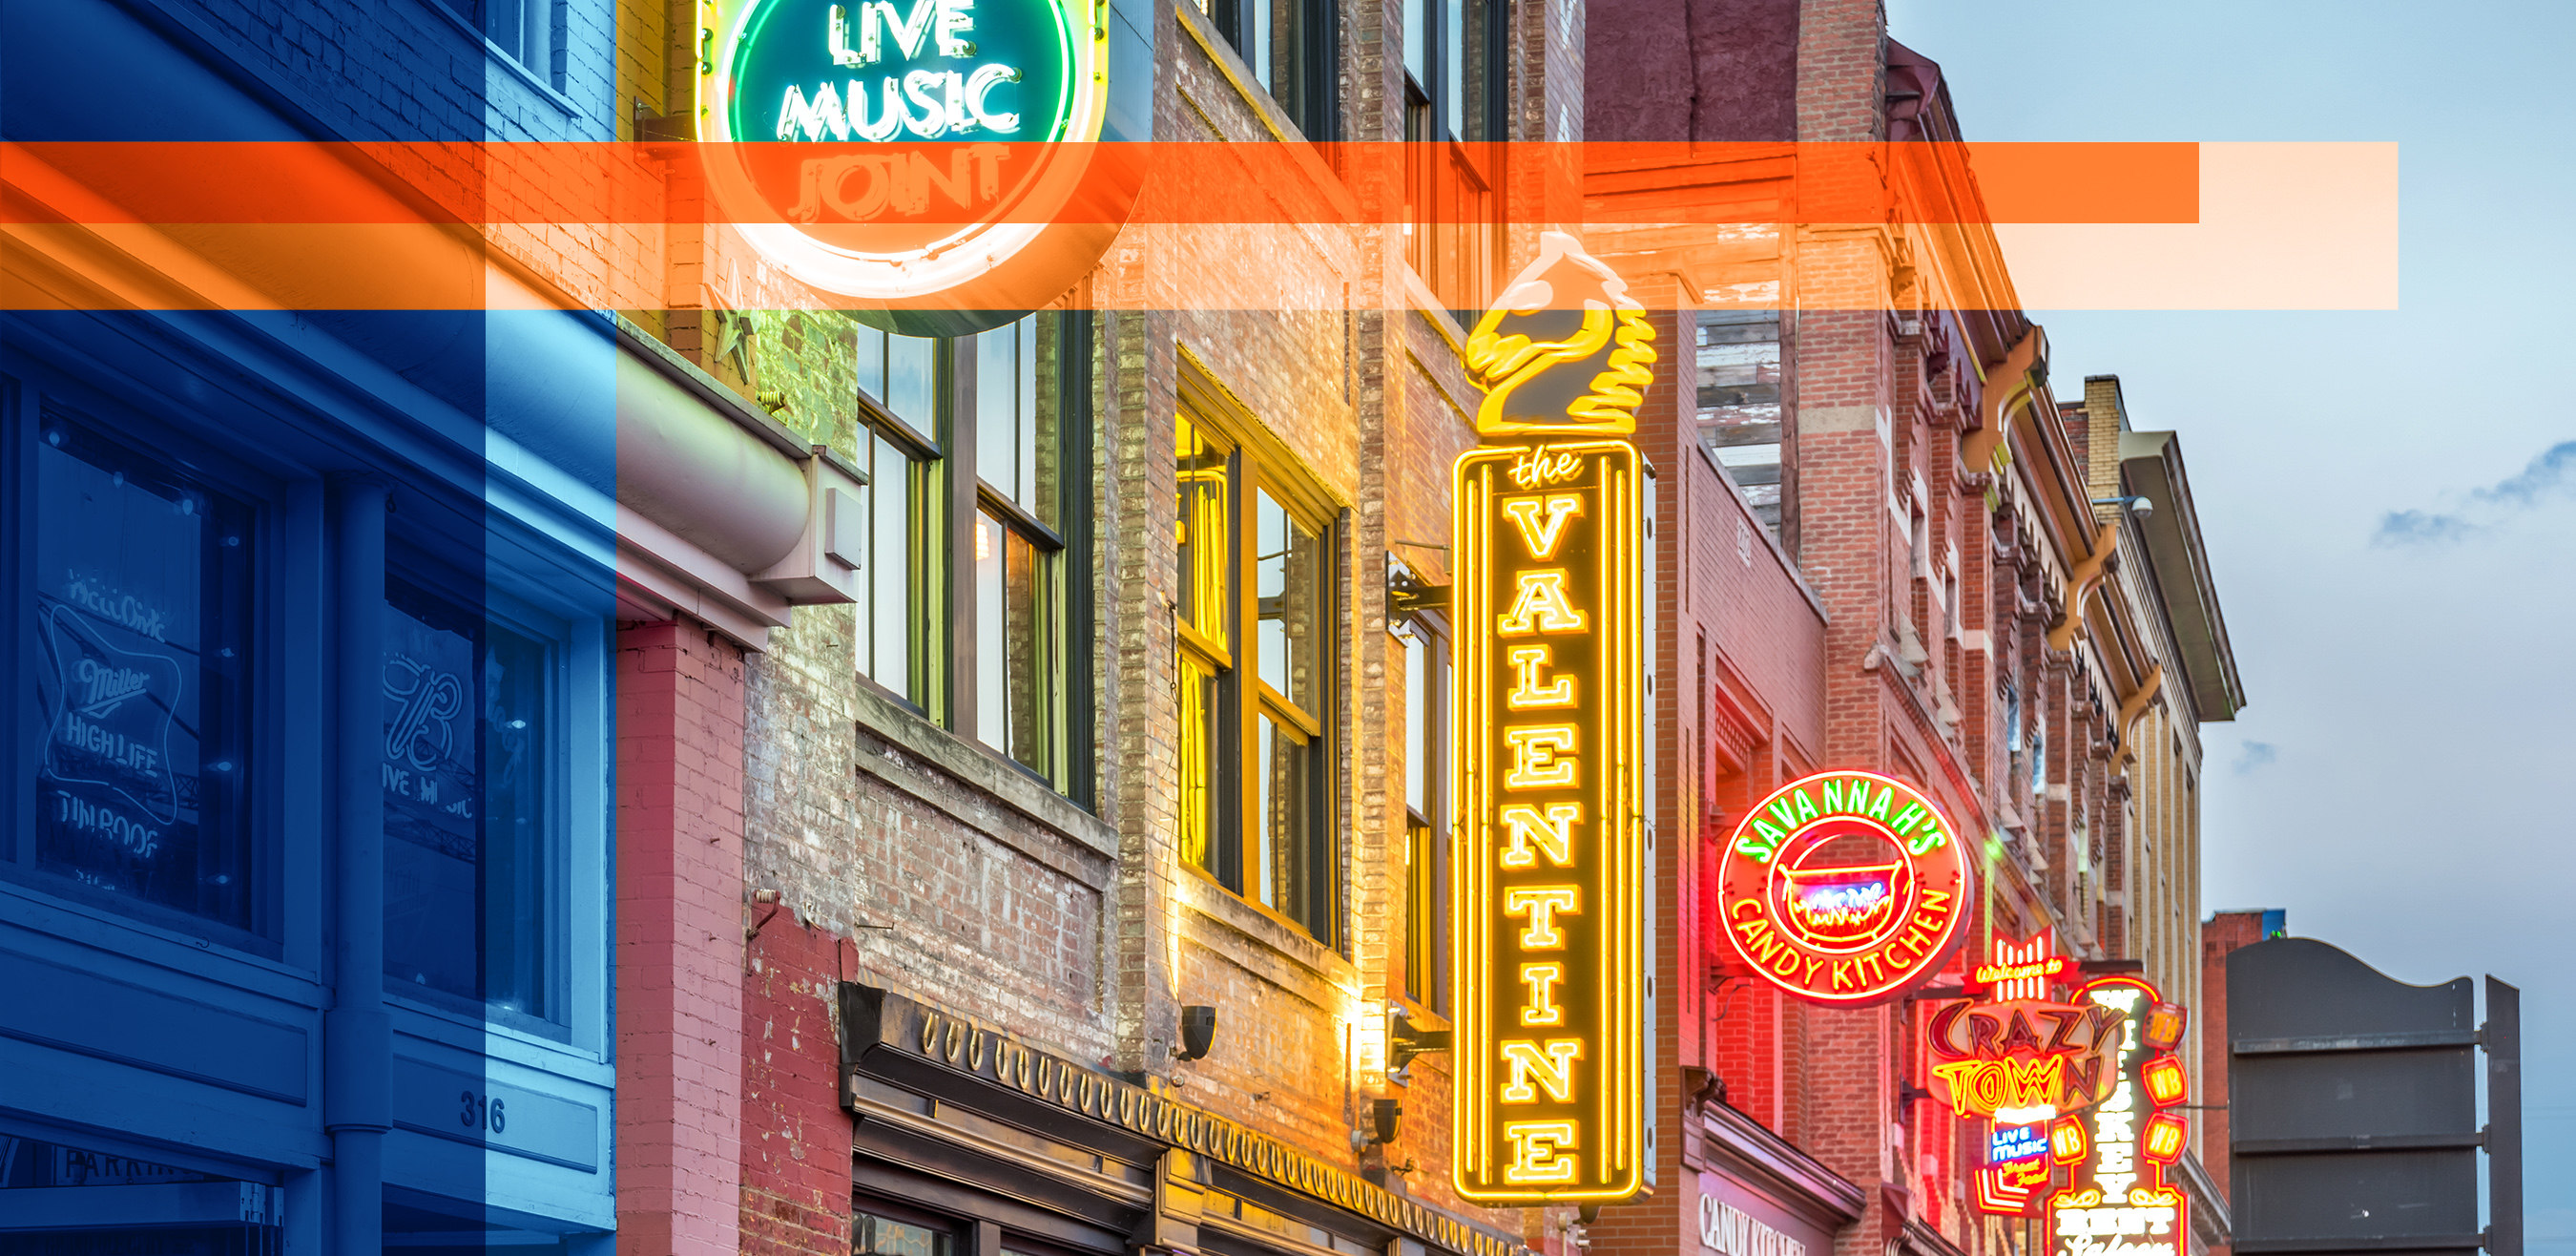 Nashville Is The Greatest Music City In The World – Here's Why